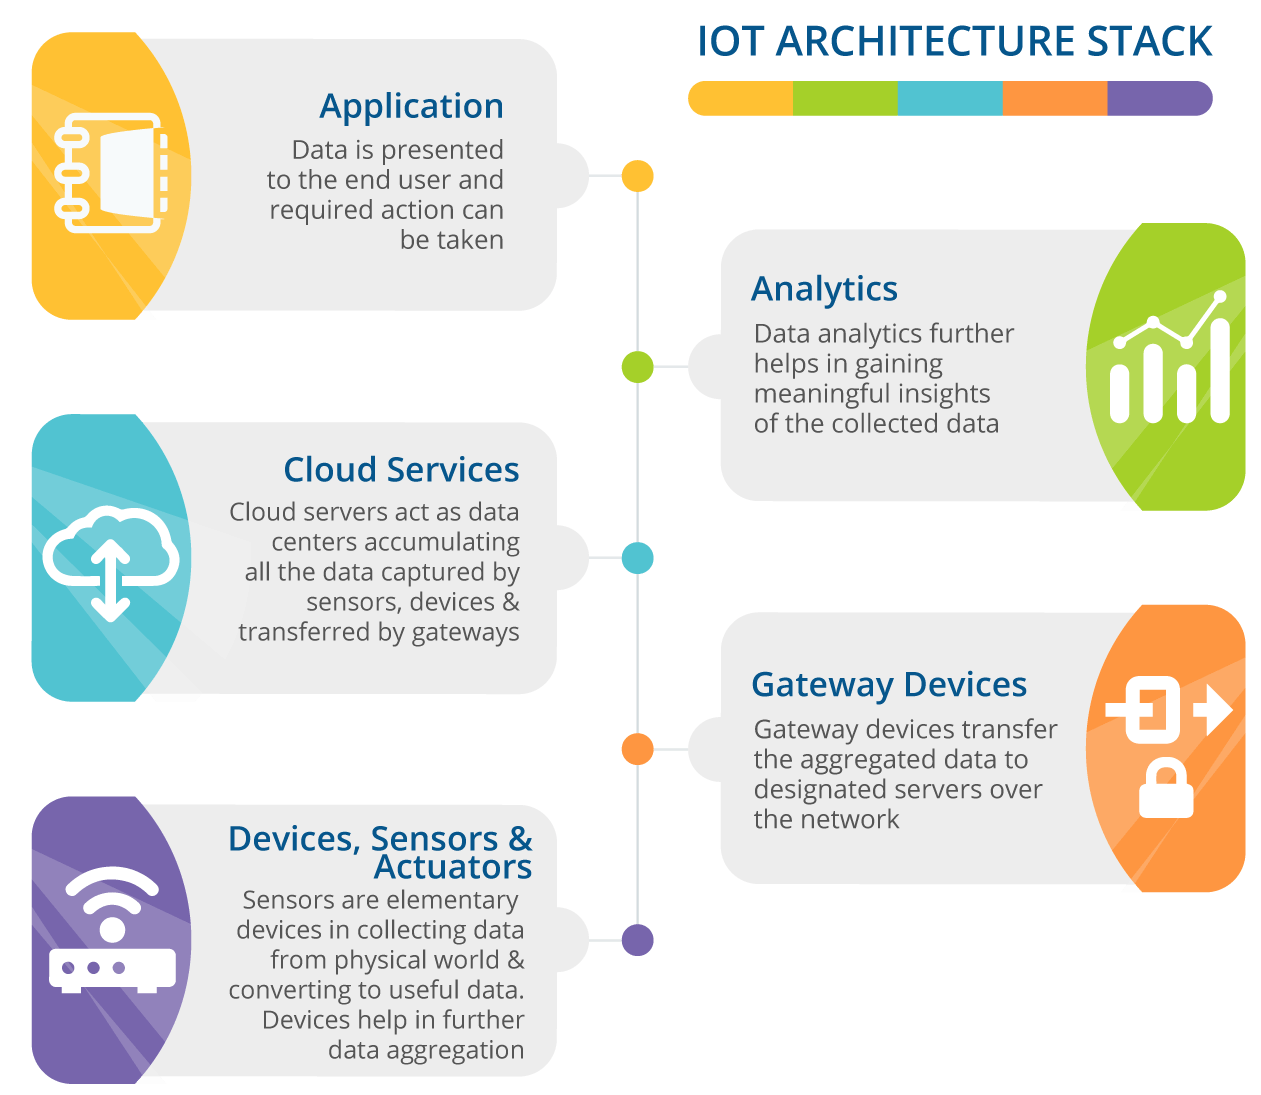 IoT architecture stack